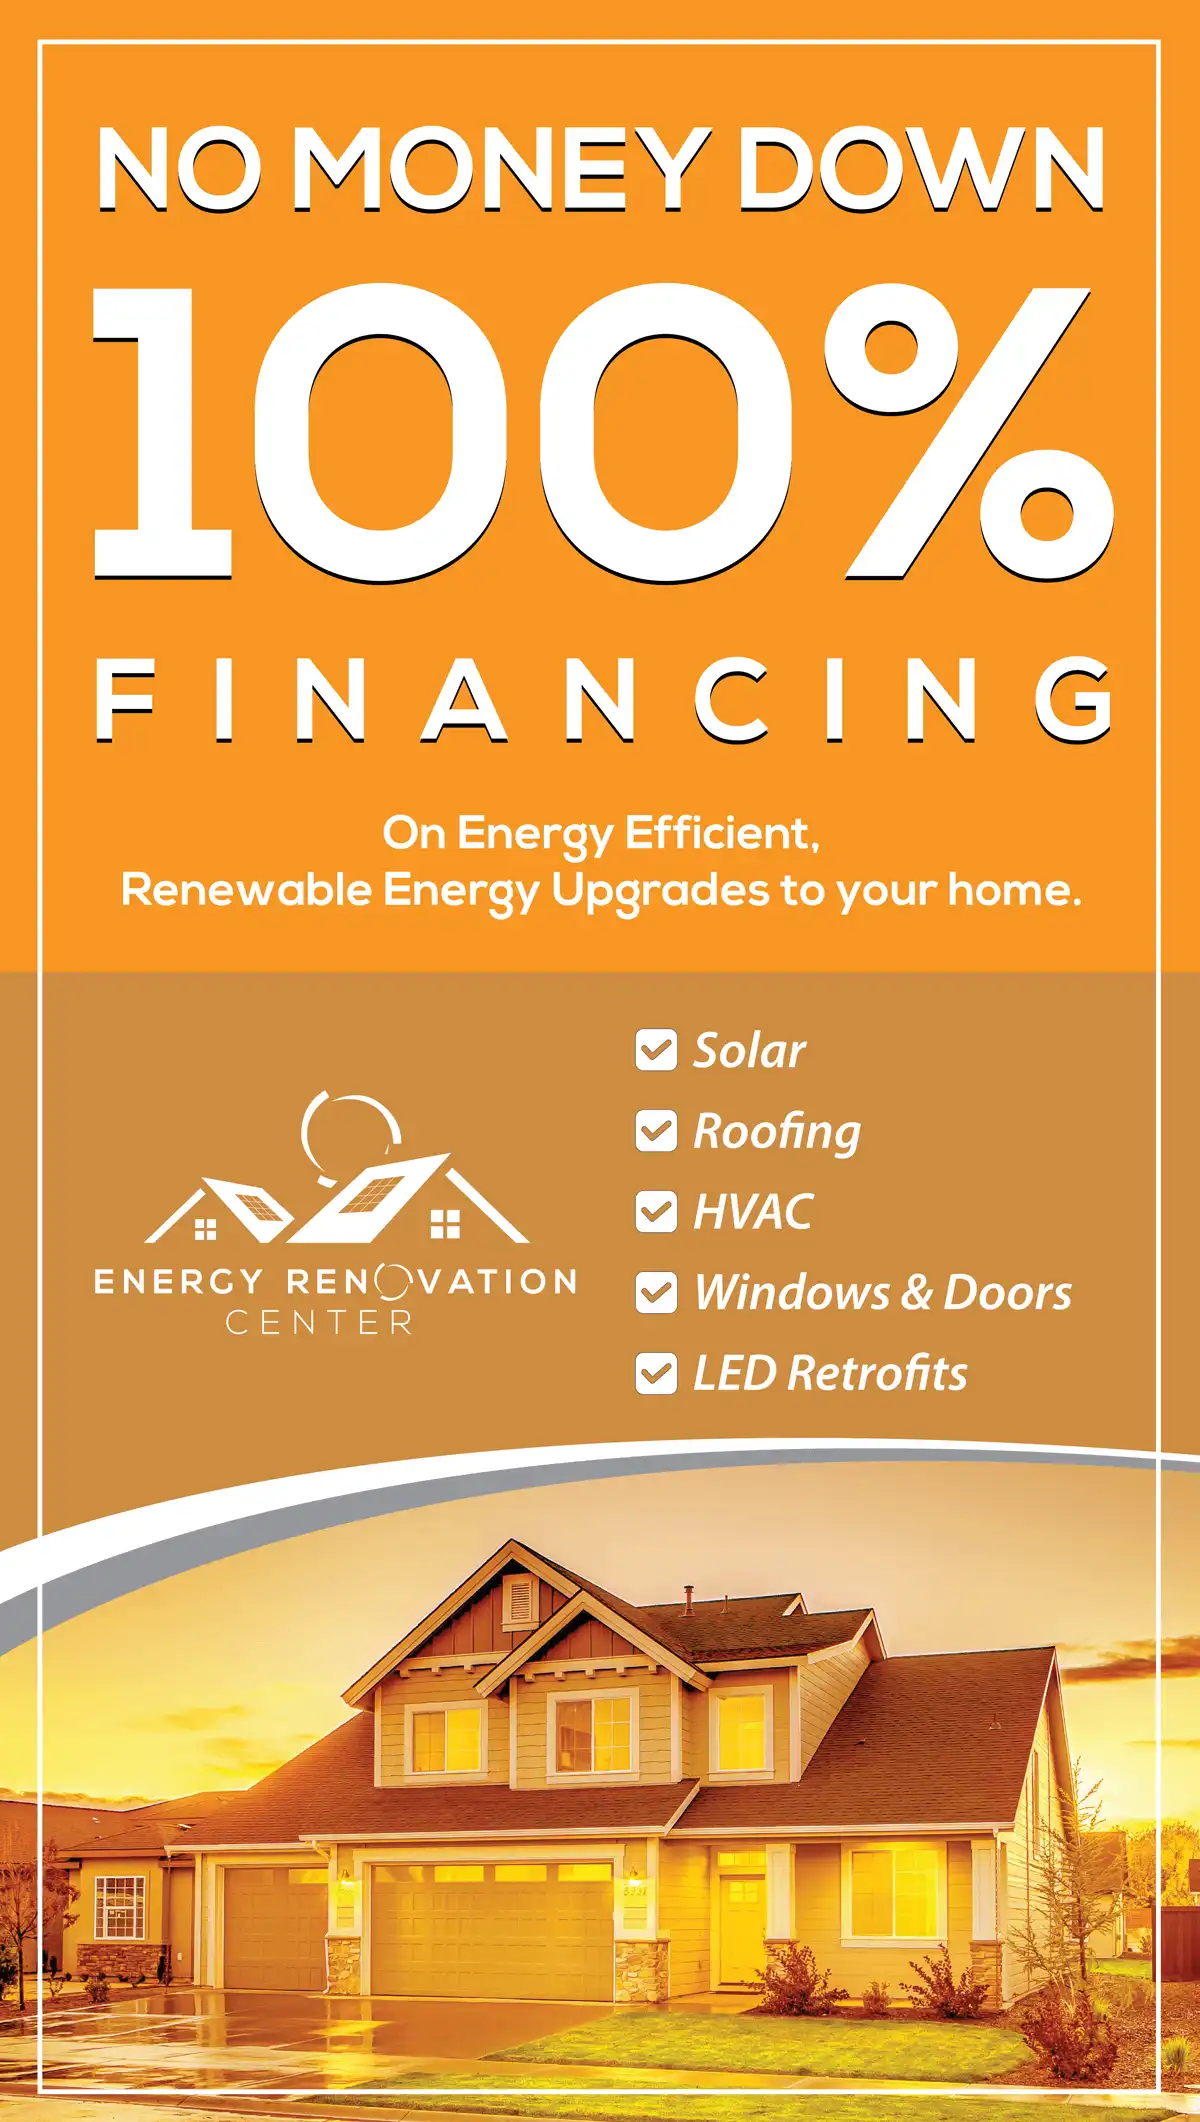 100% Financing With Zero out of pocket to go solar image